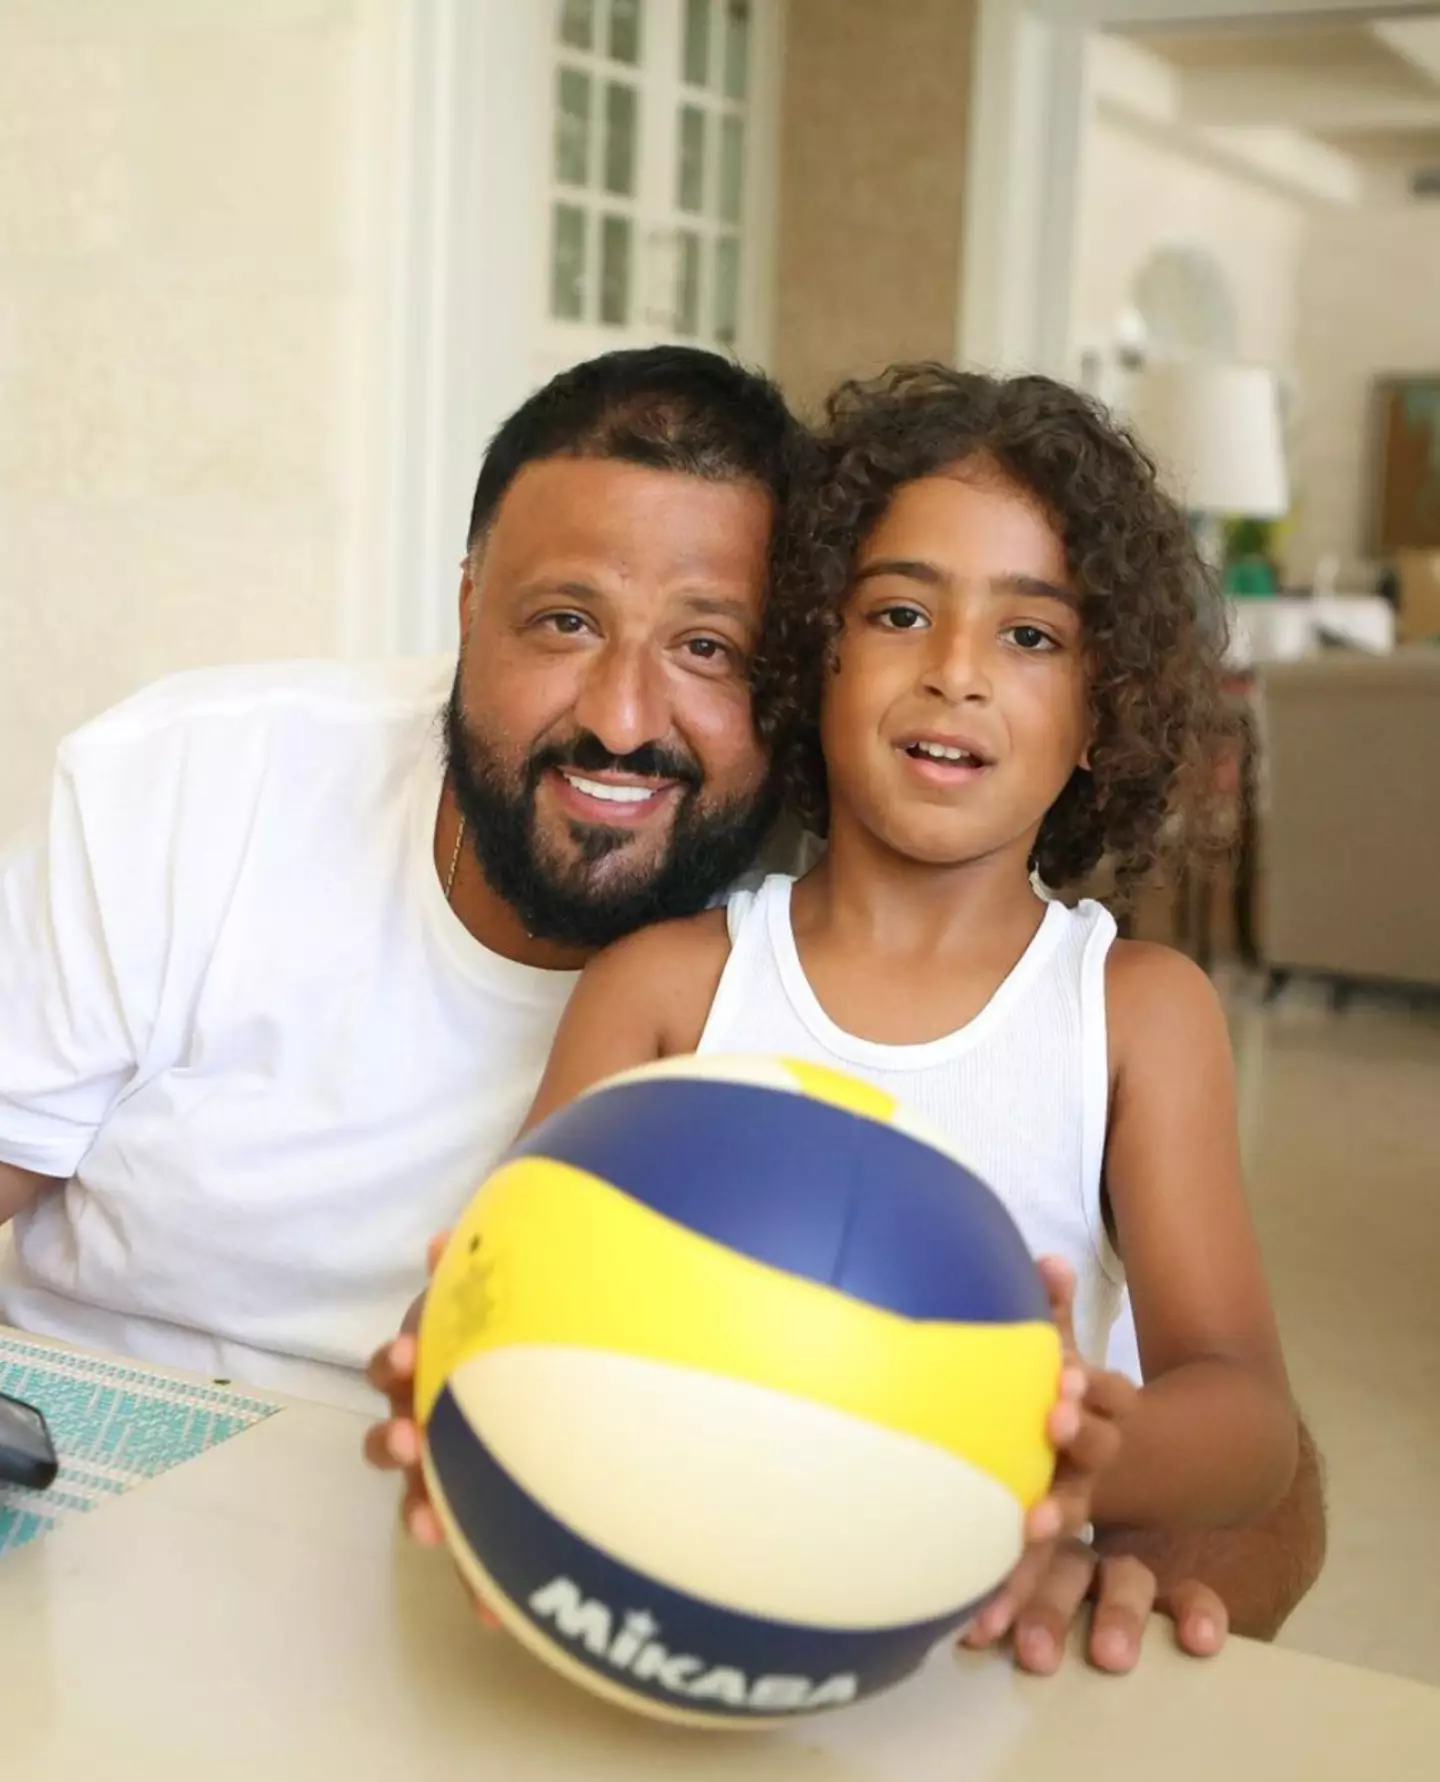 Khaled is dad to two sons.